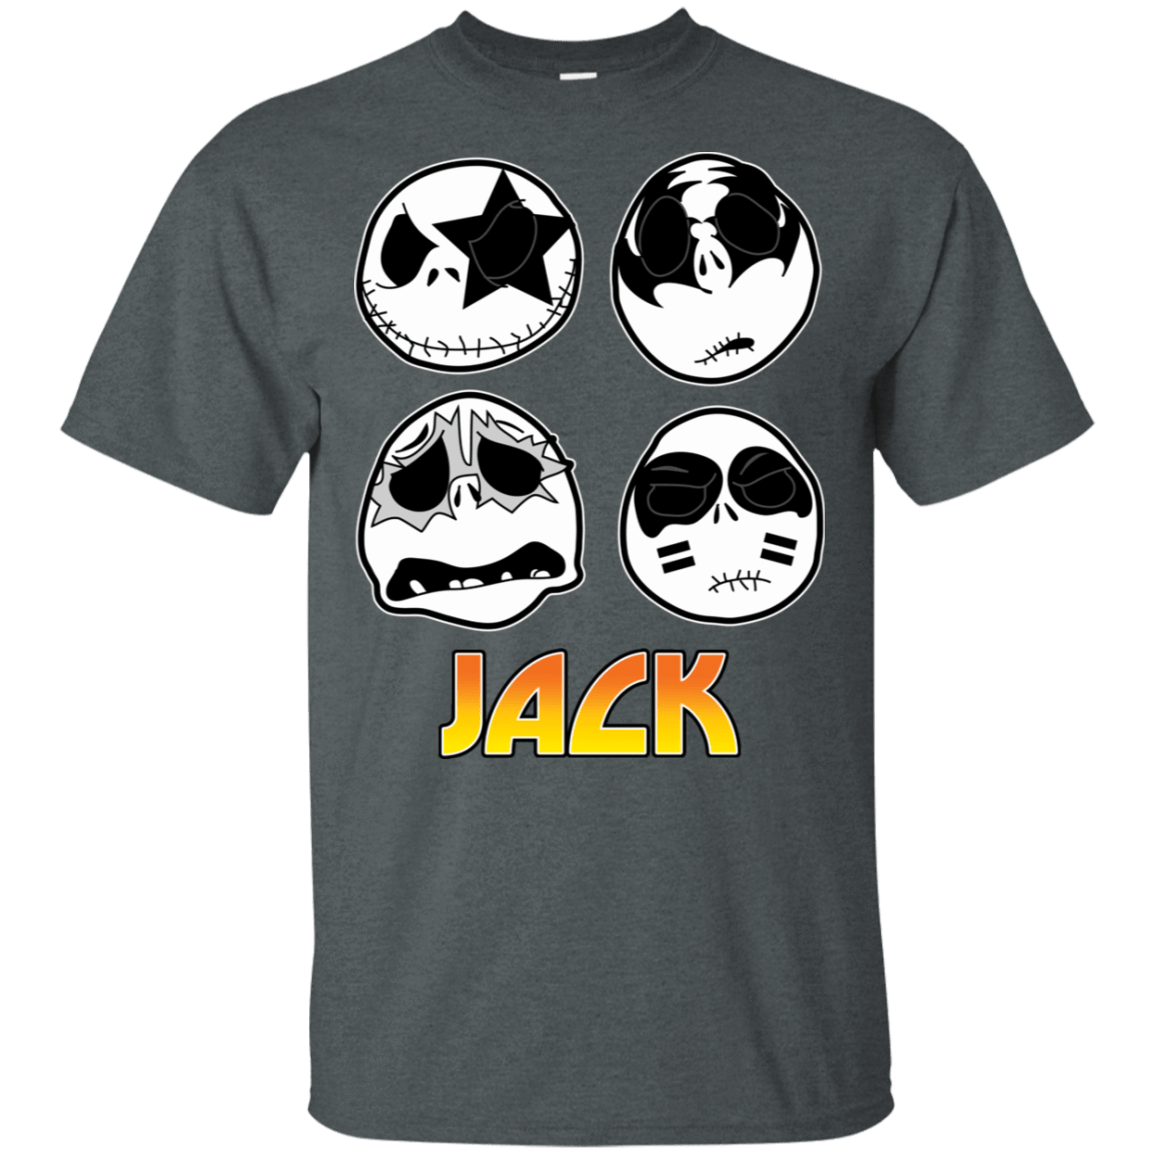 T-Shirts Dark Heather / S JACK Gave Rock and Roll to You T-Shirt